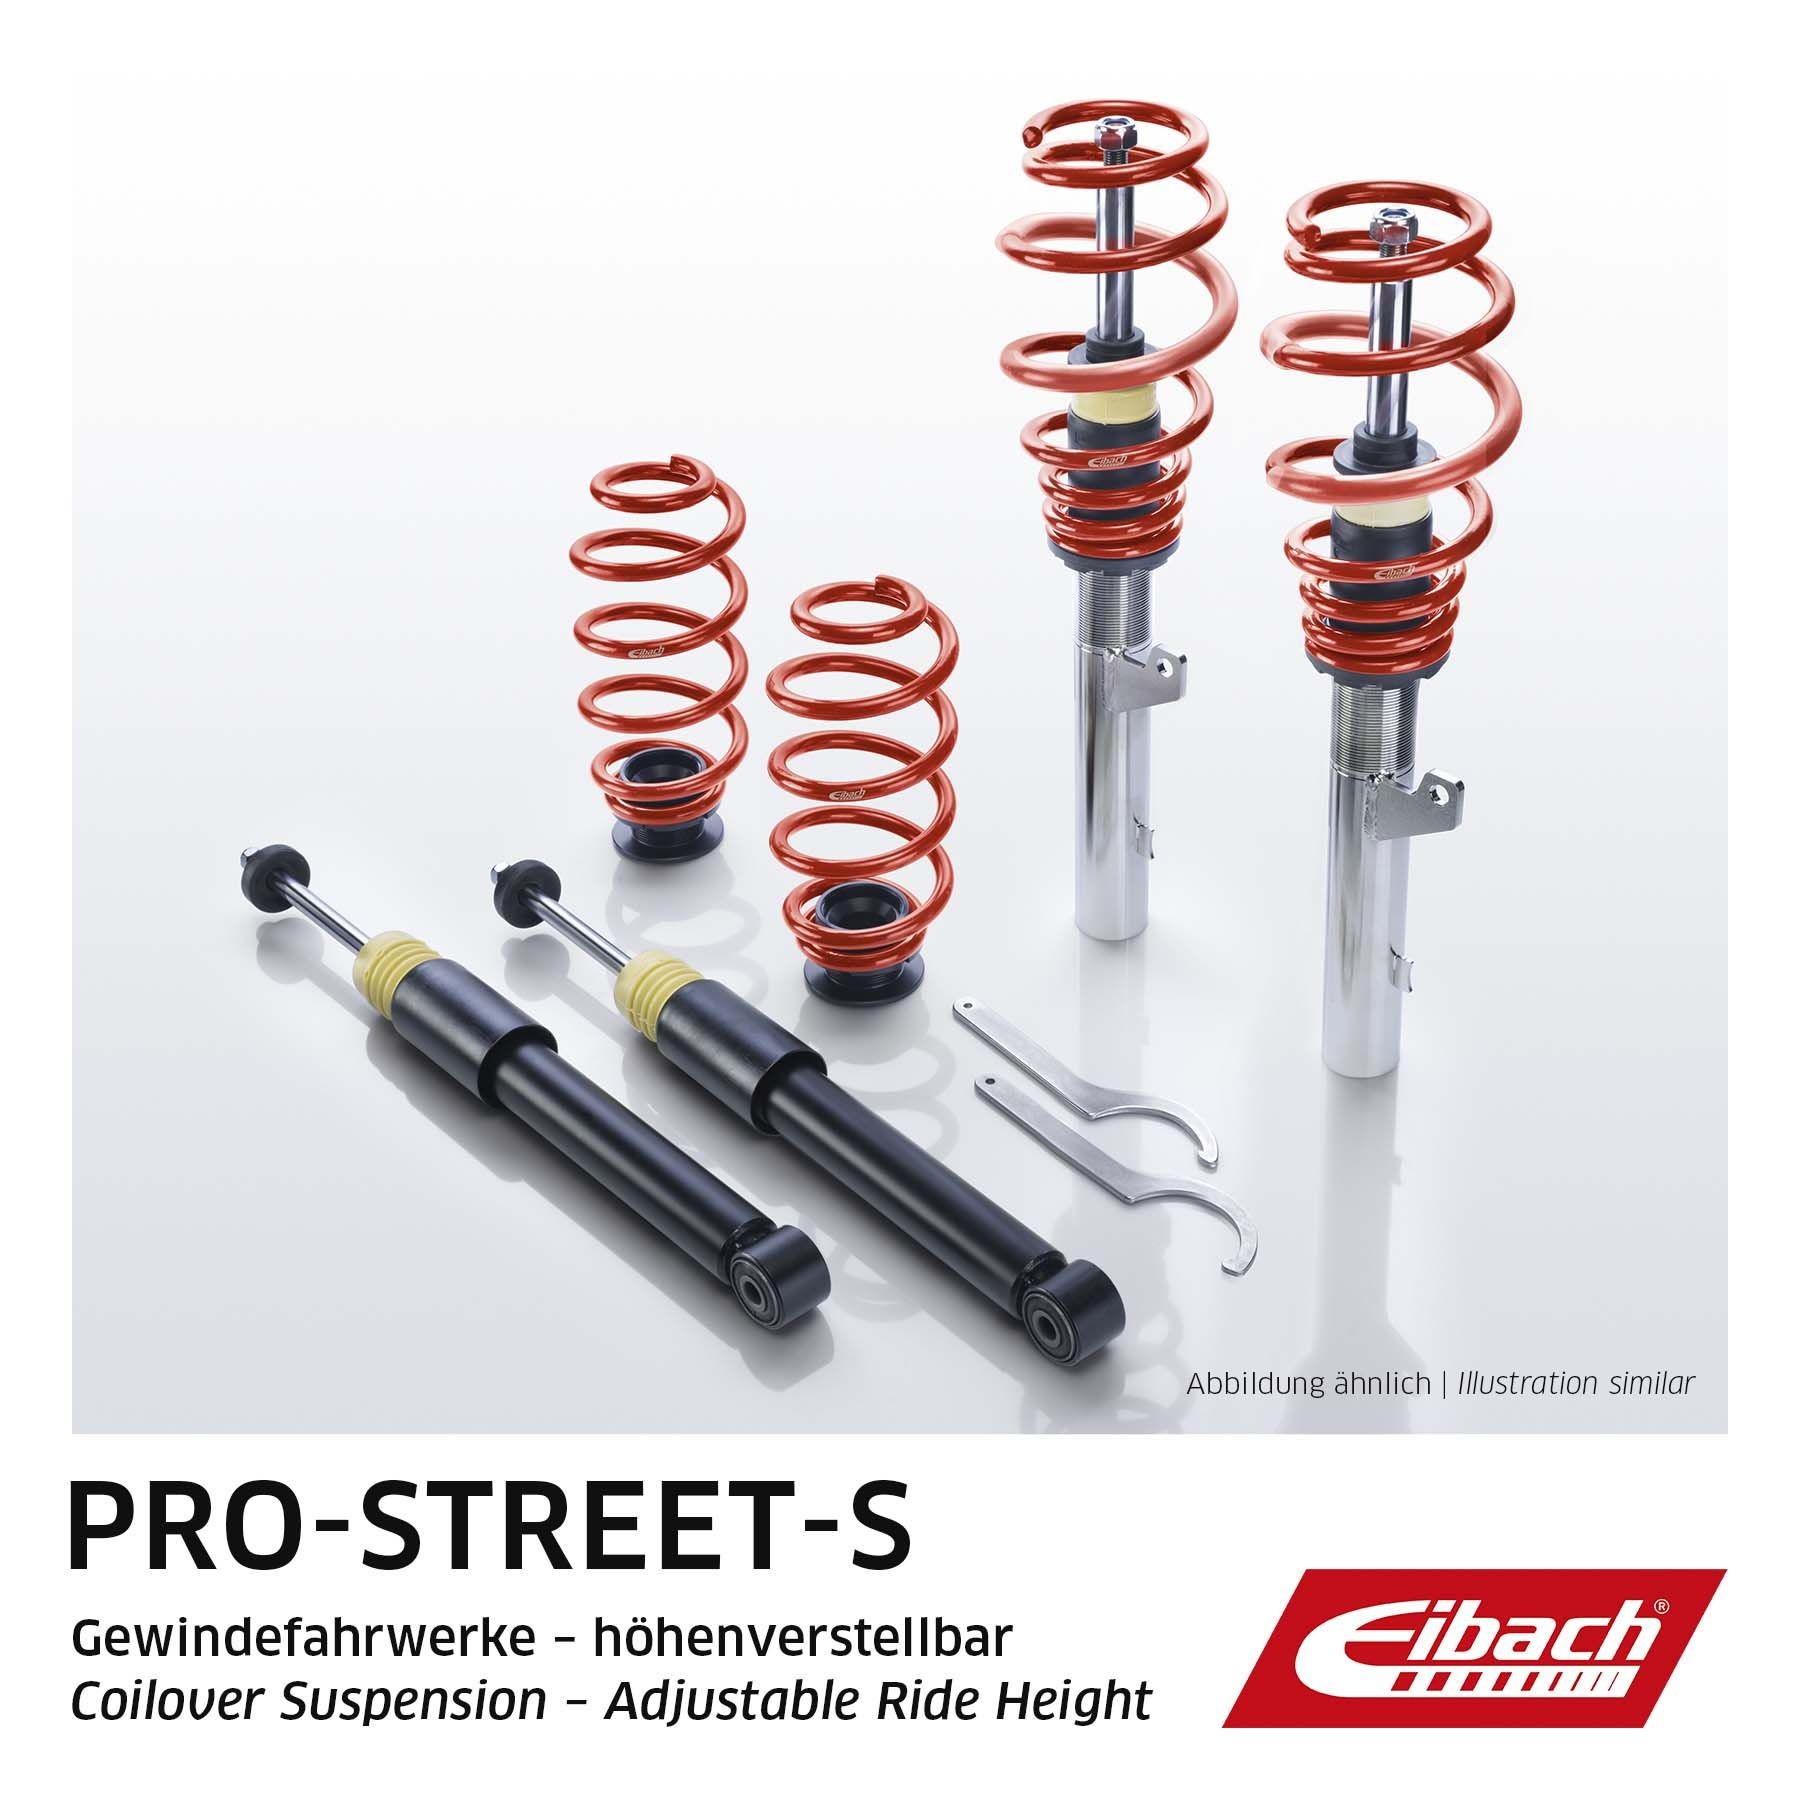 EIBACH PSS65-82-043-01-22 TOYOTA Suspension kit, coil springs / shock absorbers